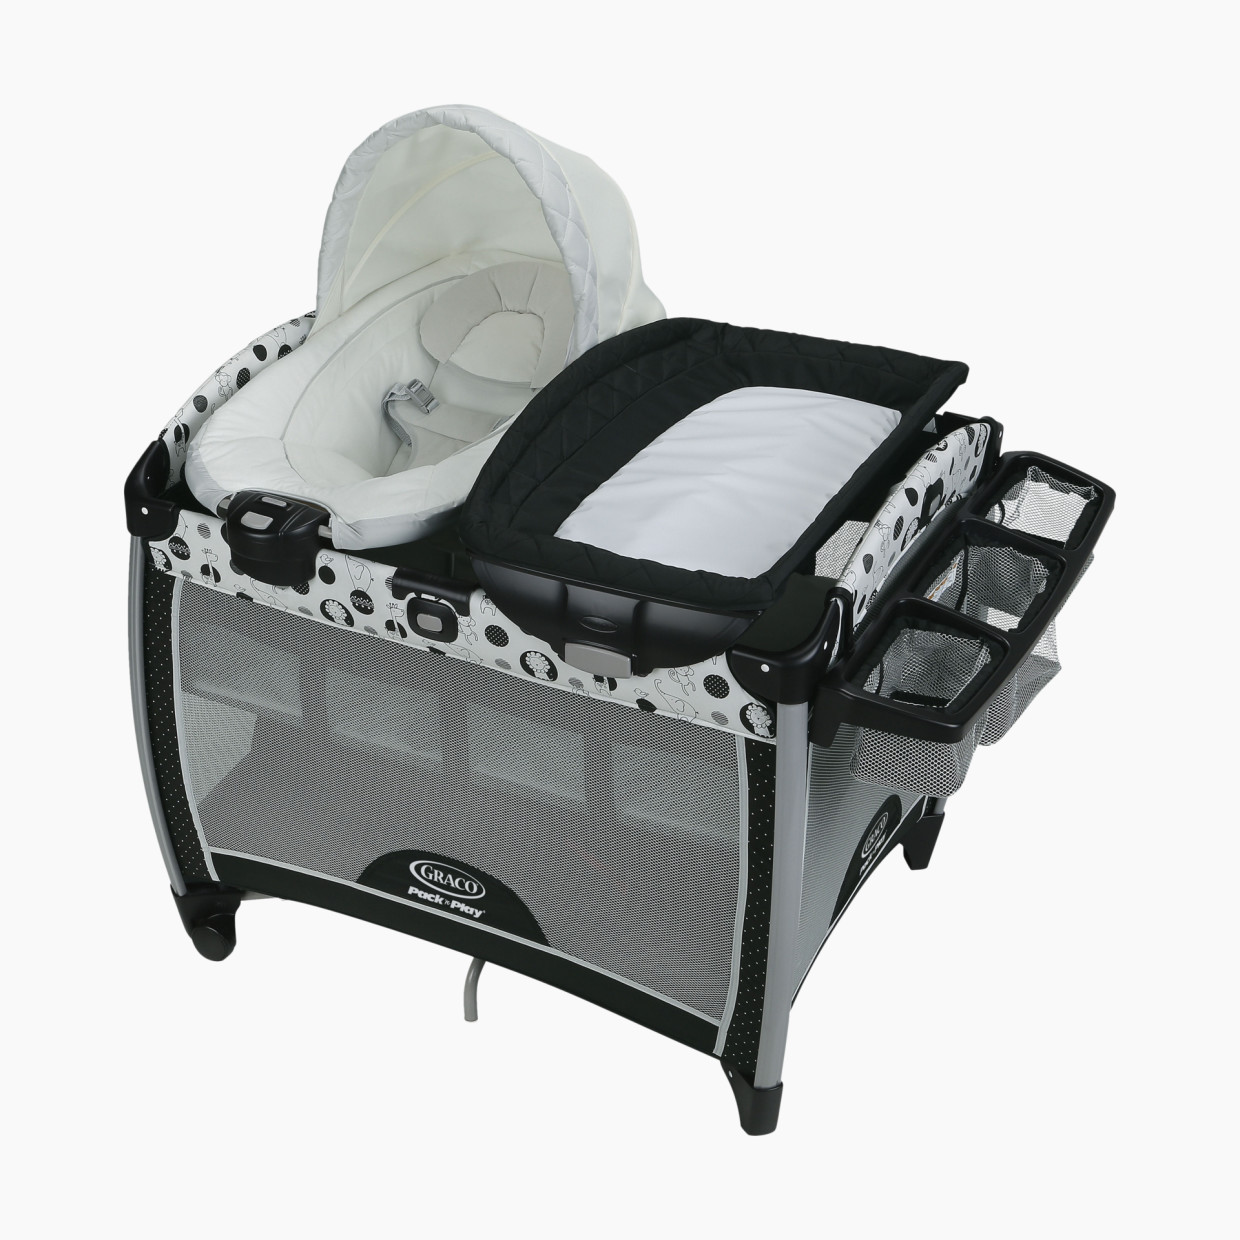 Graco Pack 'n Play Quick Connect Playard with Portable Bouncer - Balancing Act.